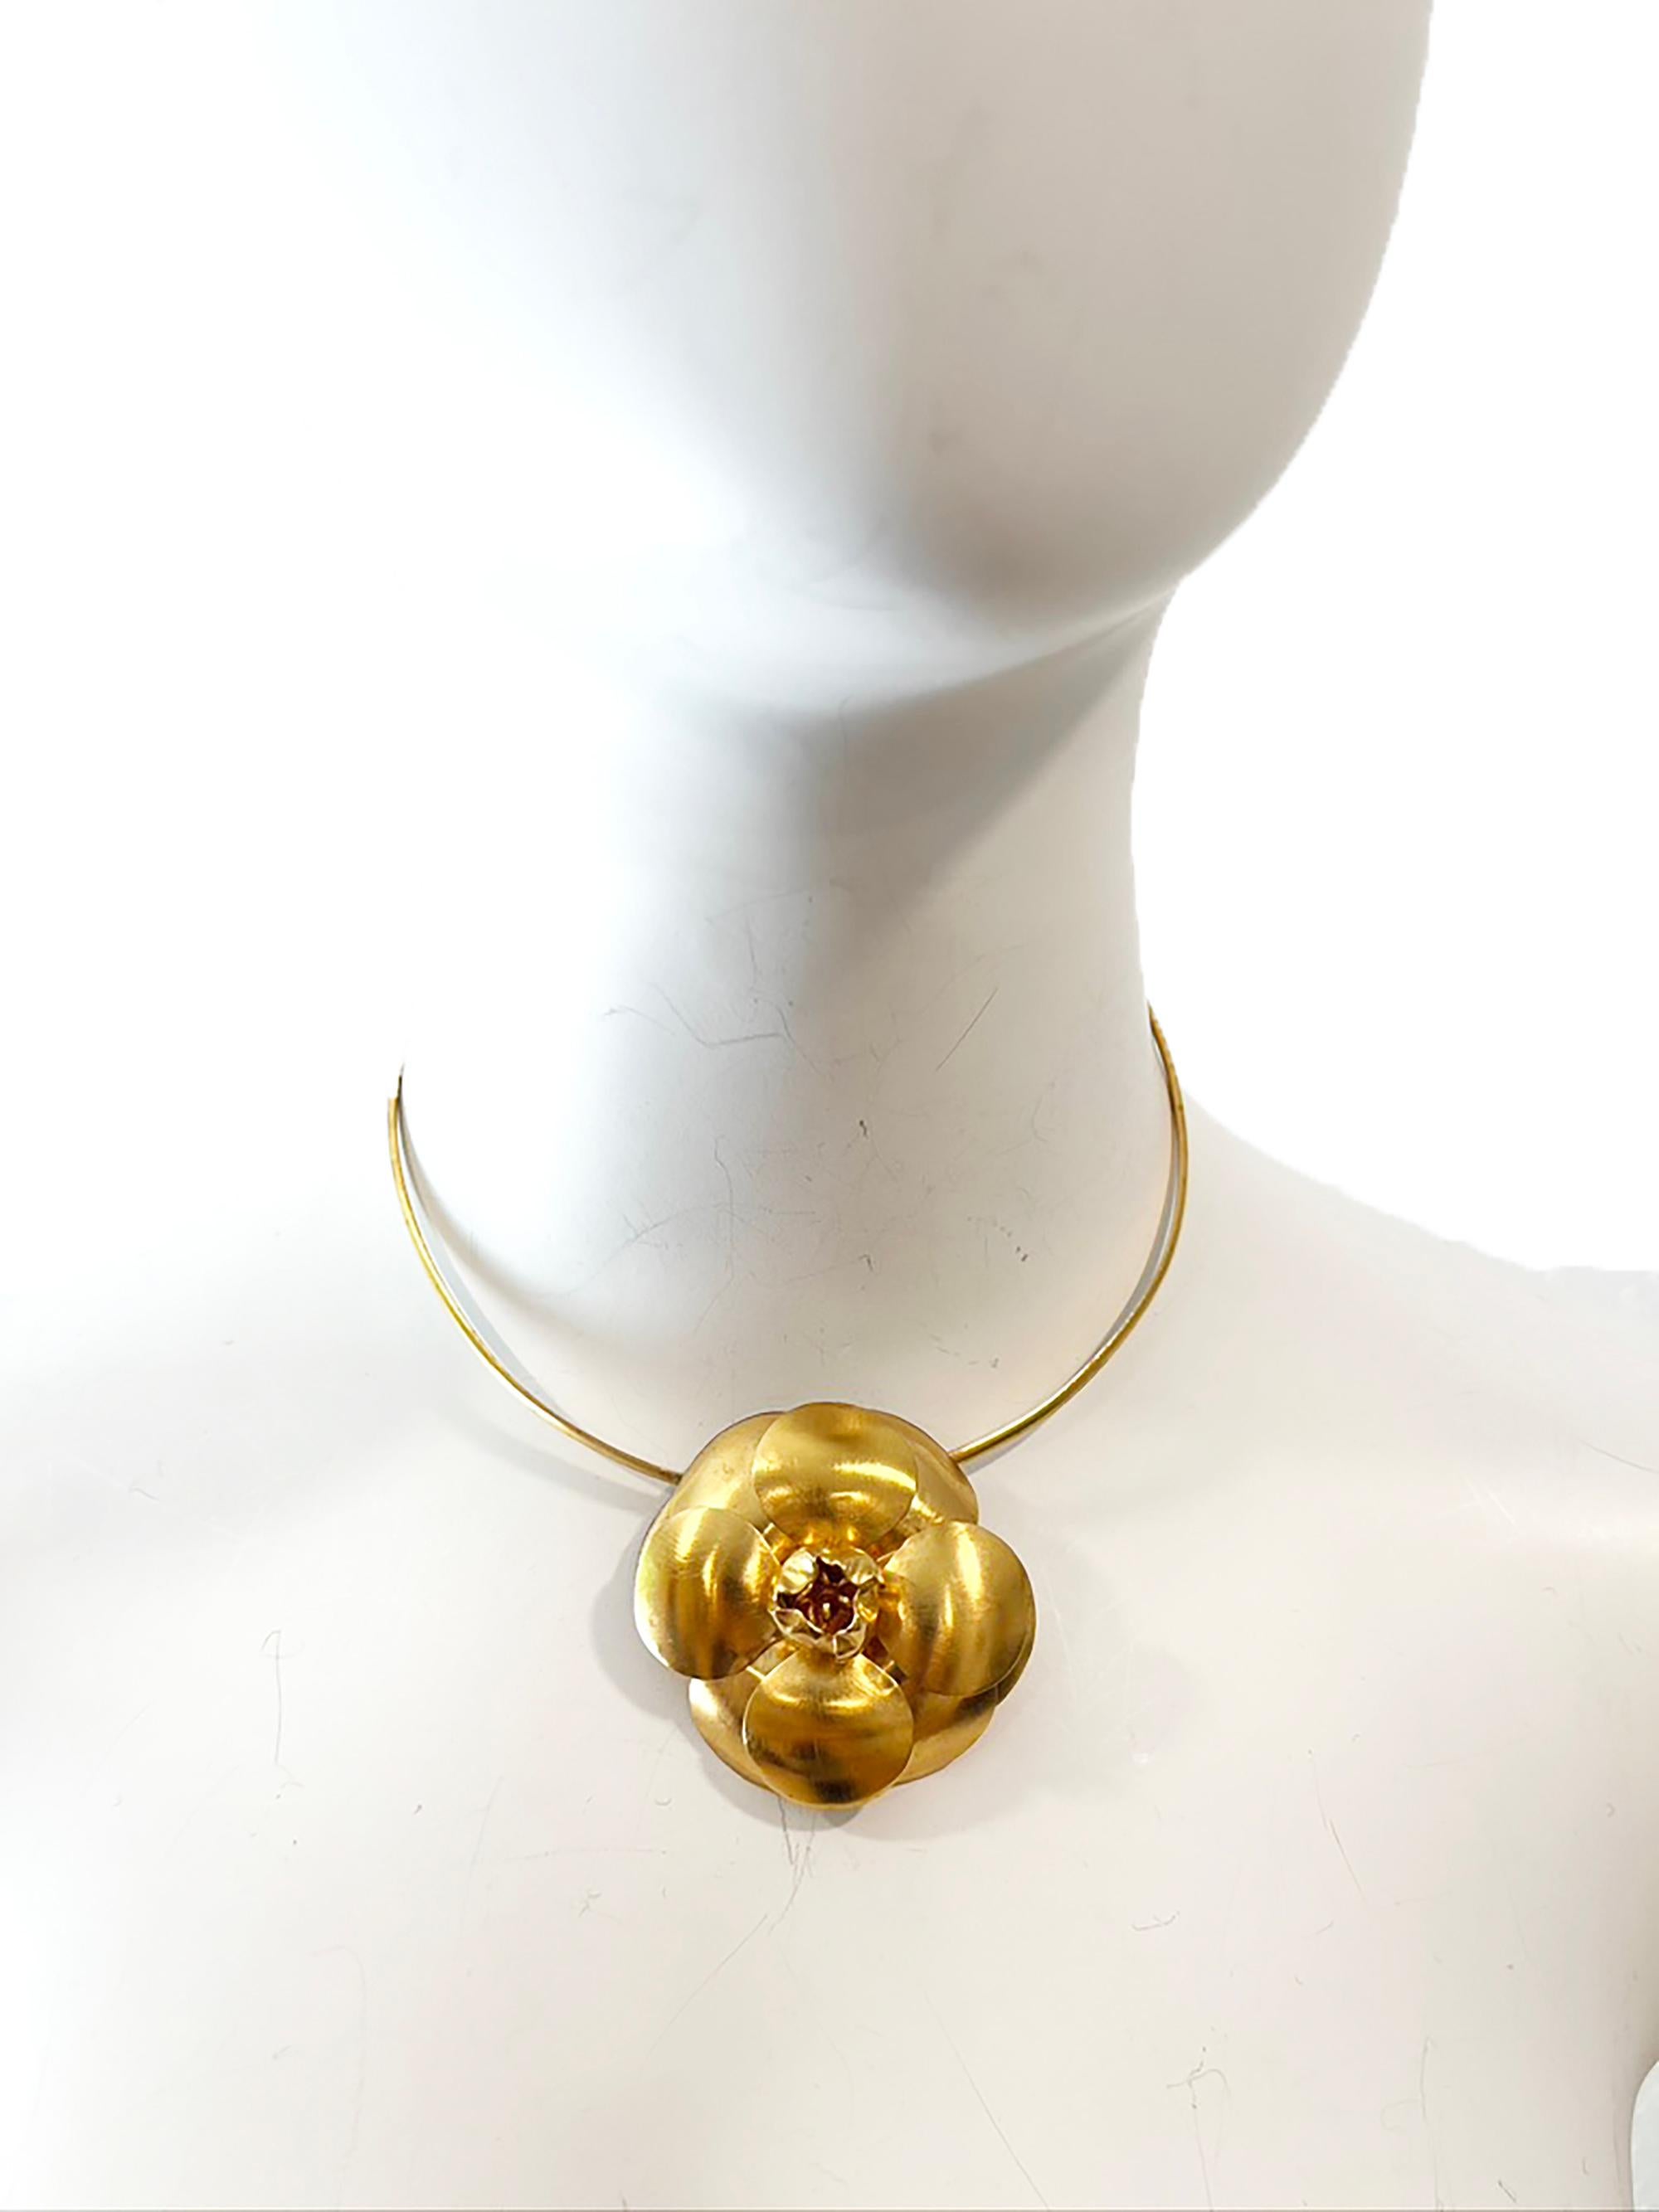 CHANEL 1998 S/S Camelia Choker 
Spring 1998 Collection by Karl Lagerfeld
Gold-Plated
Made in France
Chain Length 14